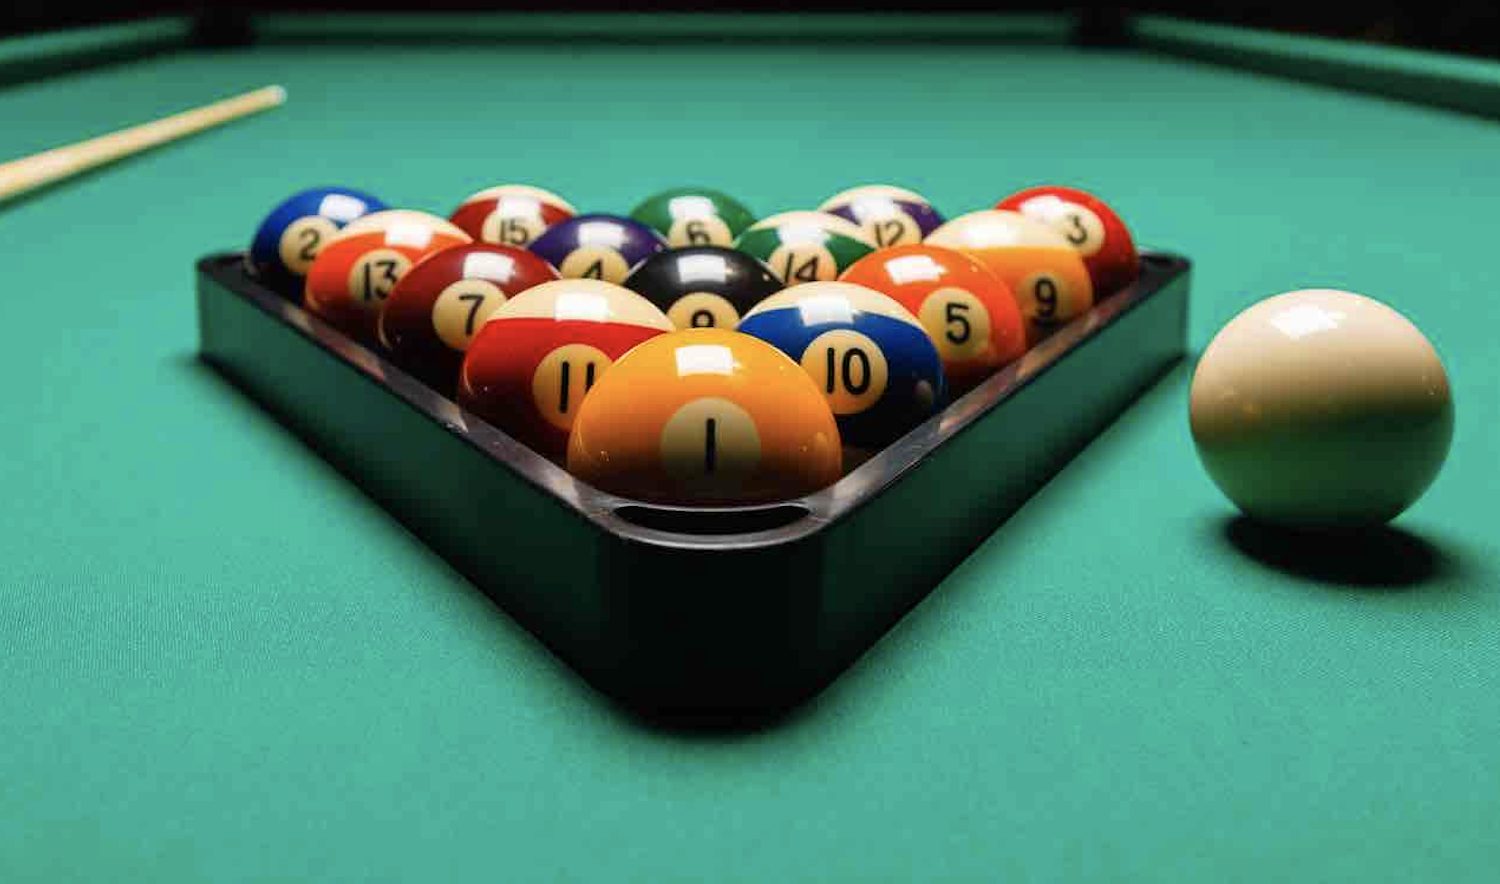 Billiards Parlor / Pool Hall for Sale In Pembroke Pines with Darts, Bar Food – Sale of Assets